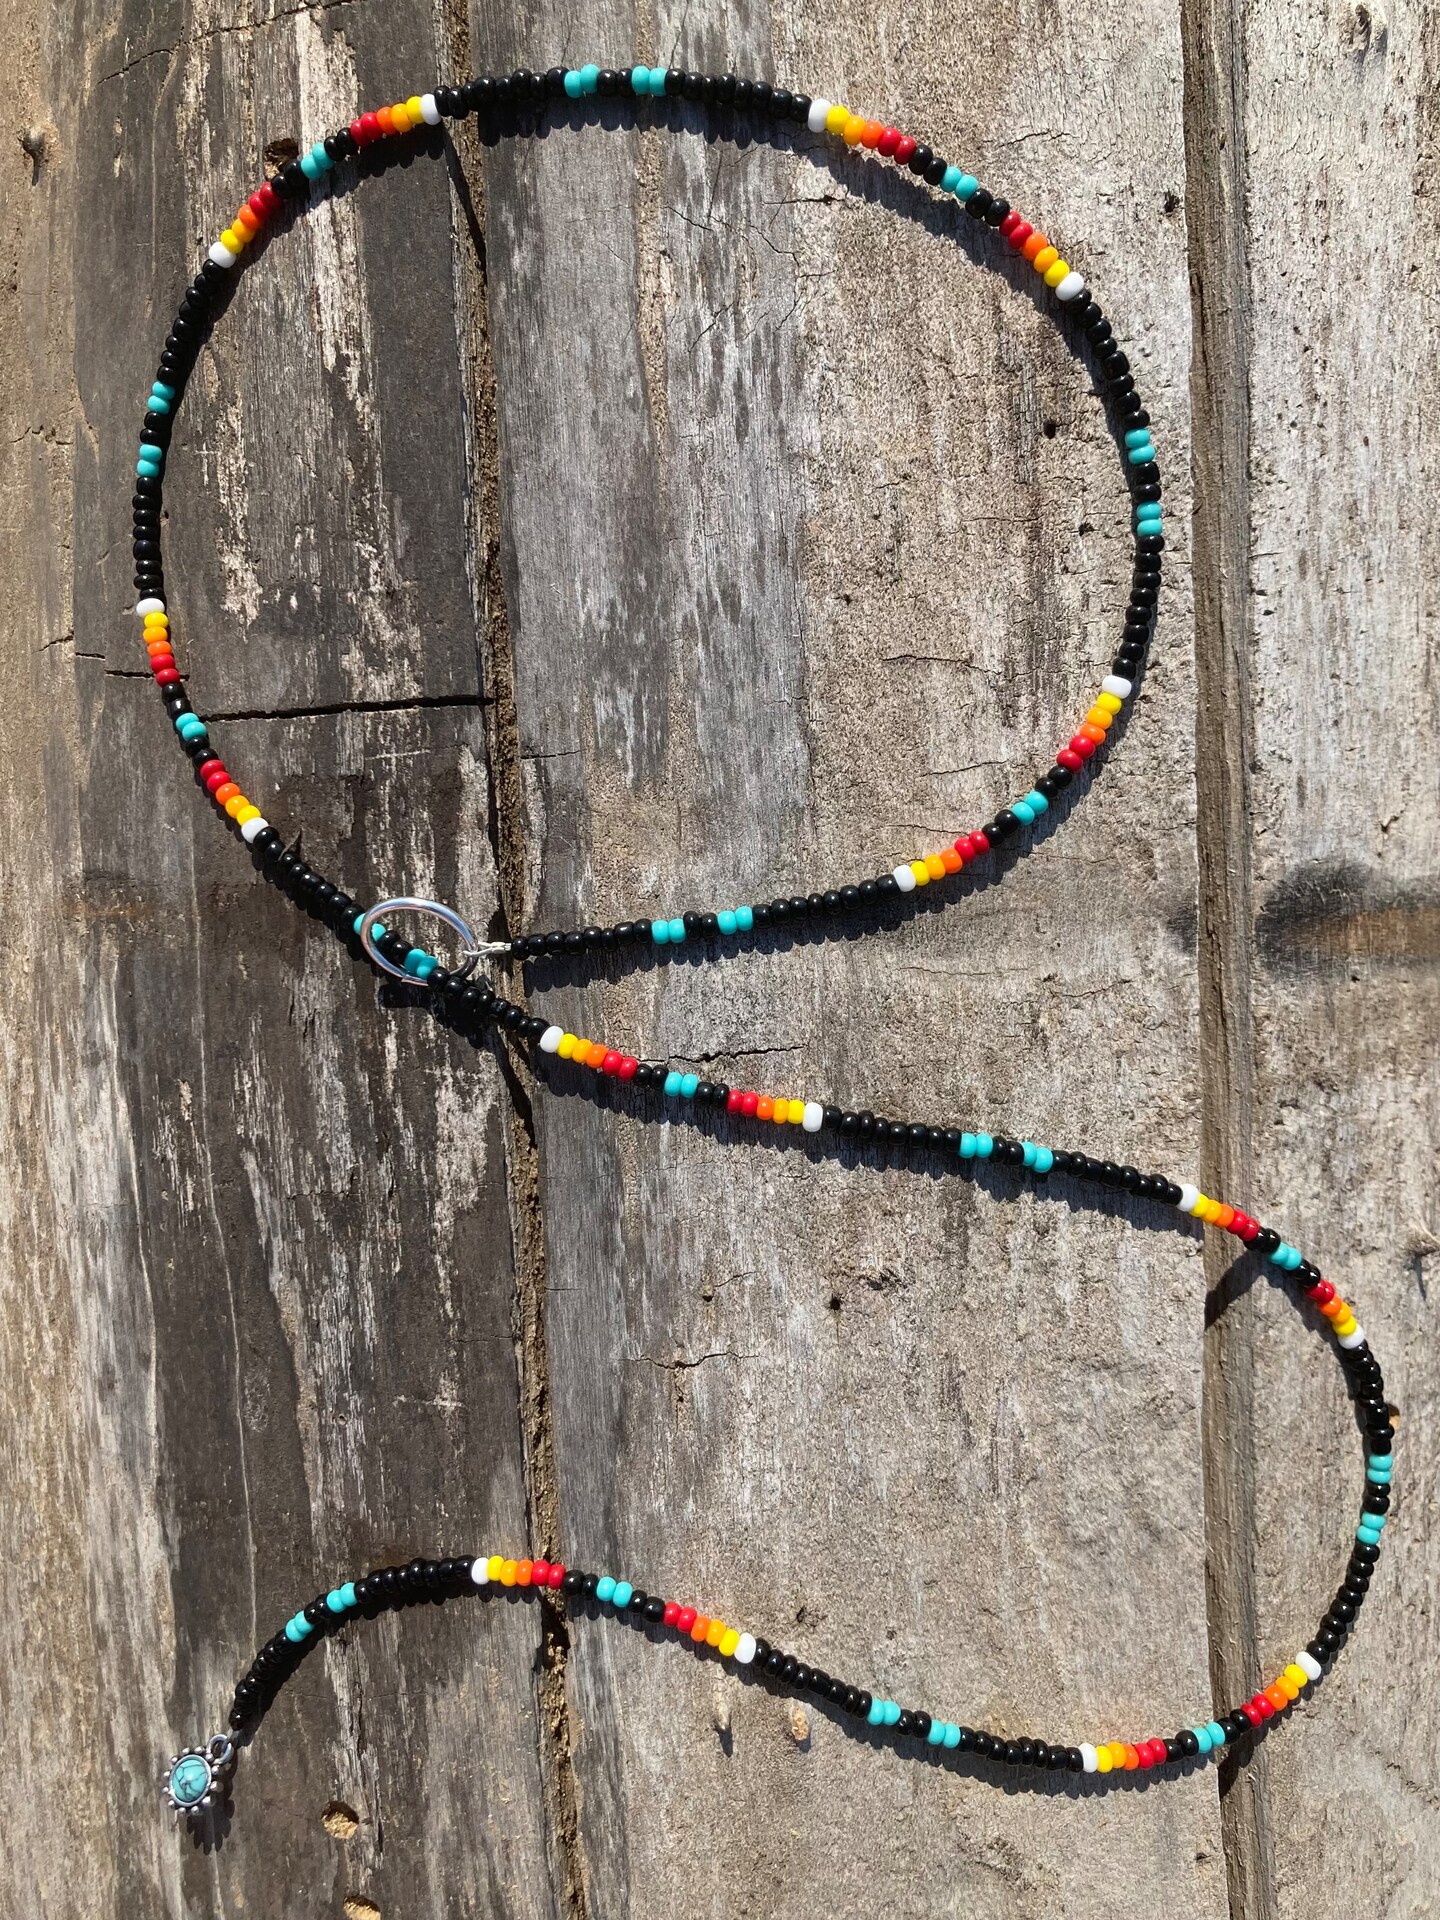 Amazon.com: Wrap Necklace, Colorful Bead Necklace, Long Tie Choker, Wrap  Seed Bead, Lariat Necklace, Christmas Gift Woman, Wrapped Beaded Choker :  Handmade Products